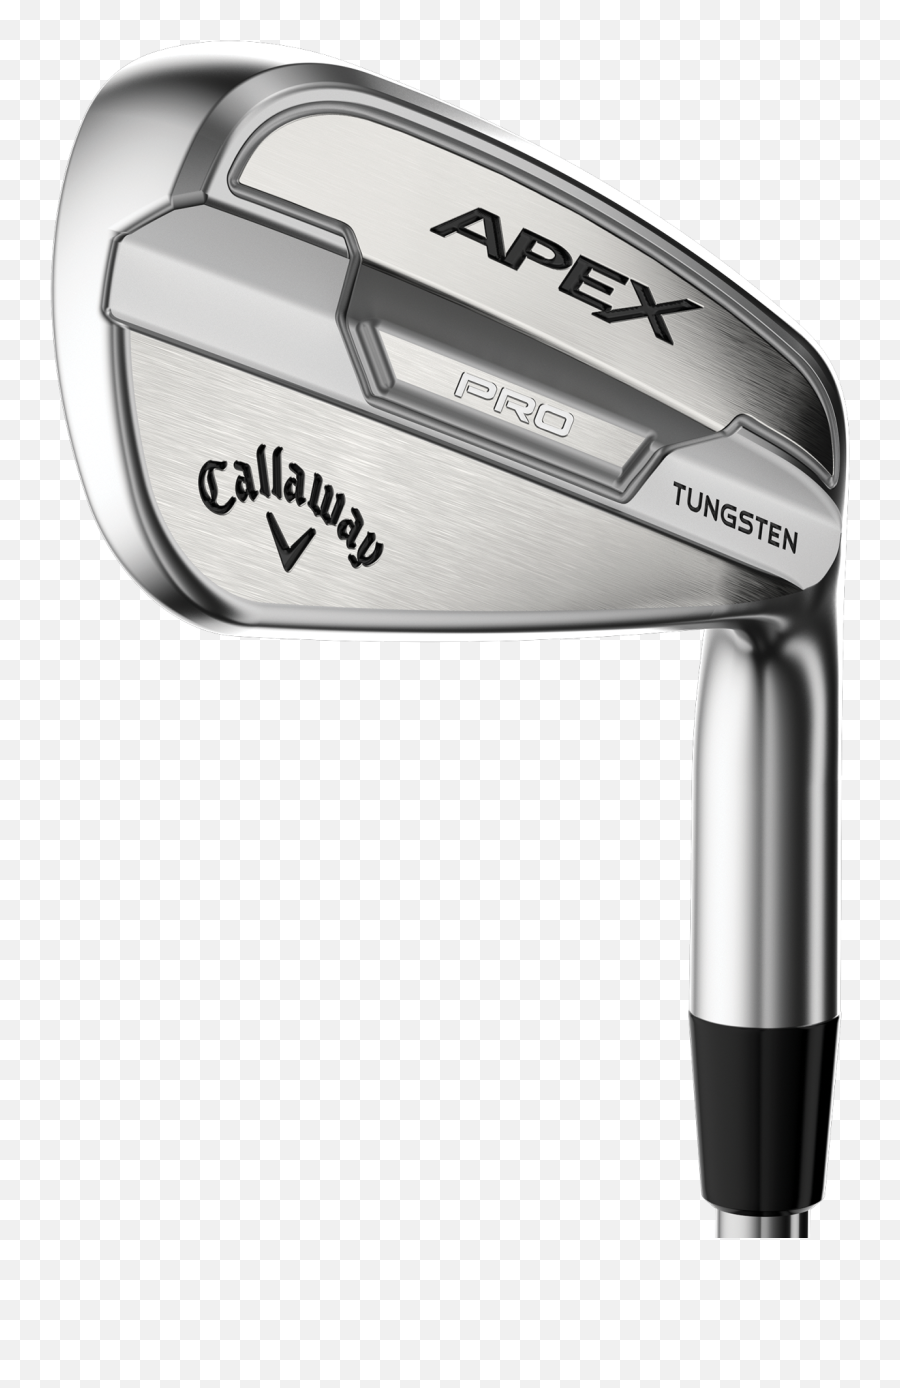 Callaway - Apex Pro 21 Irons Emoji,Quick Fixes For Managing Your Emotions On The Golf Course